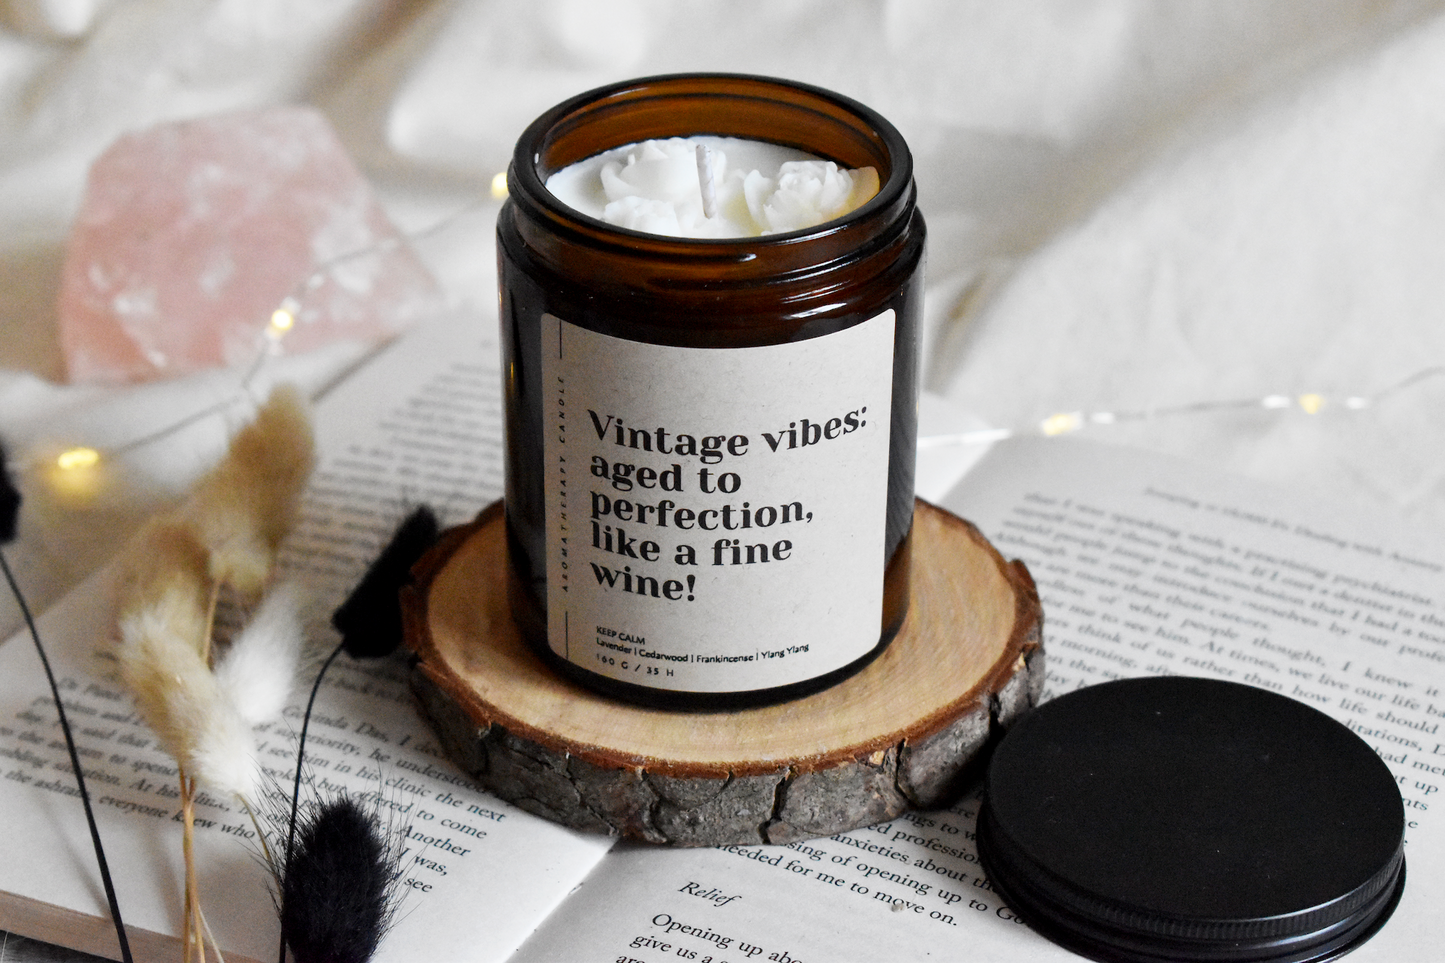 Nr.17 - Funny Birthday Candle: Vintage Vibes: aged to perfection...